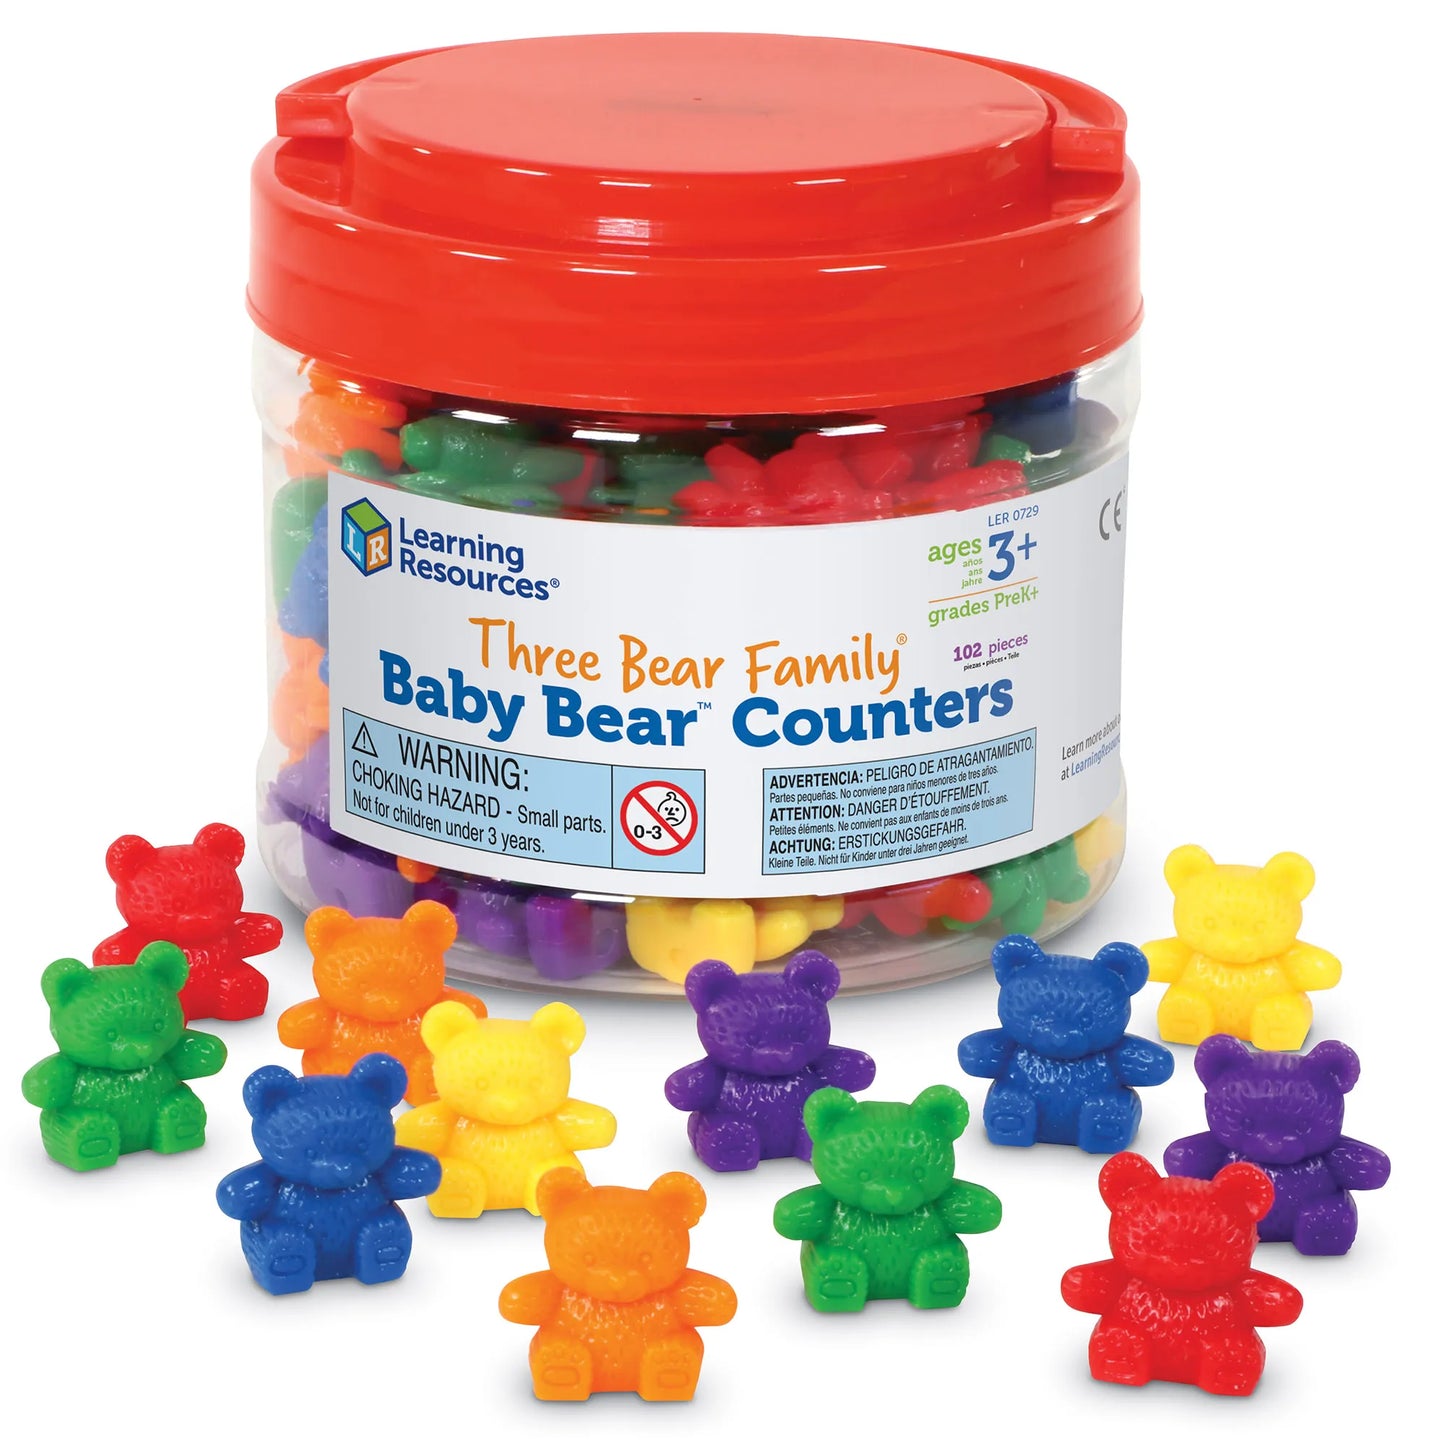 Learning Resources Three Bear Family Baby Bear Counters 102 Pcs Set